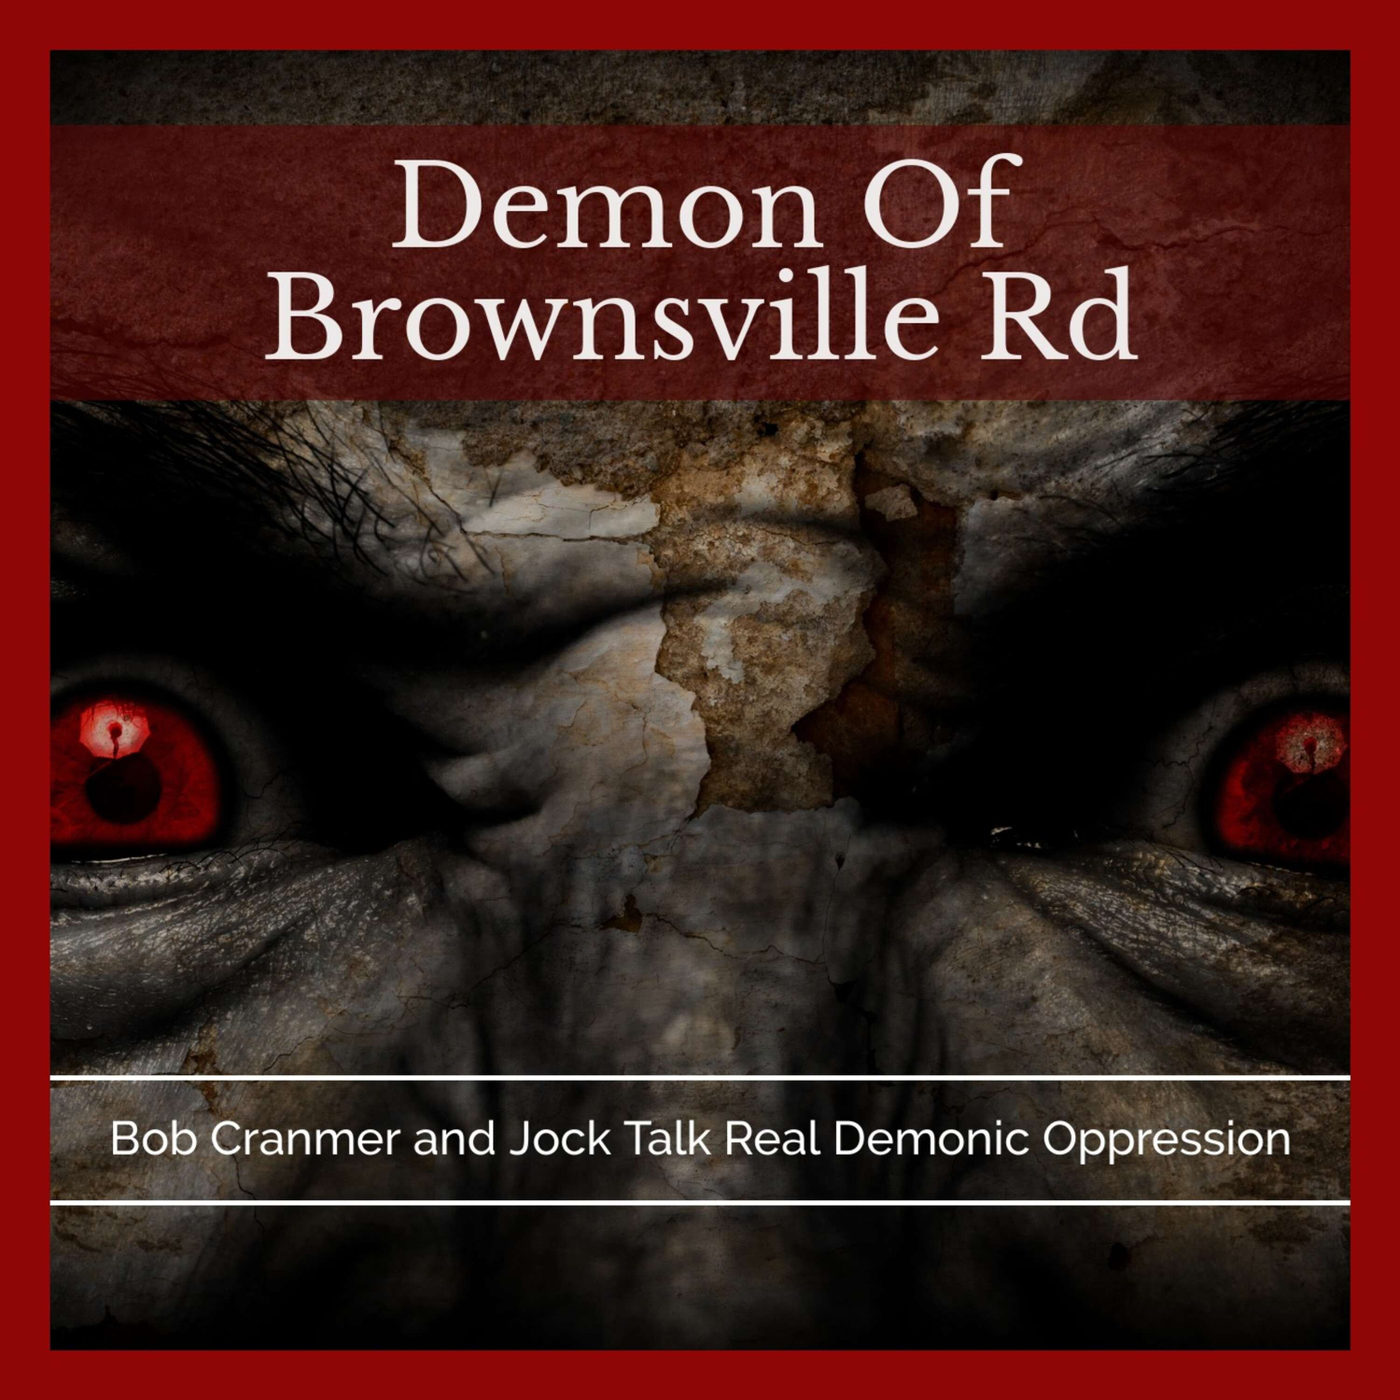 The Demon Of Brownsville Road With Bob Cranmer and Jock Brocas